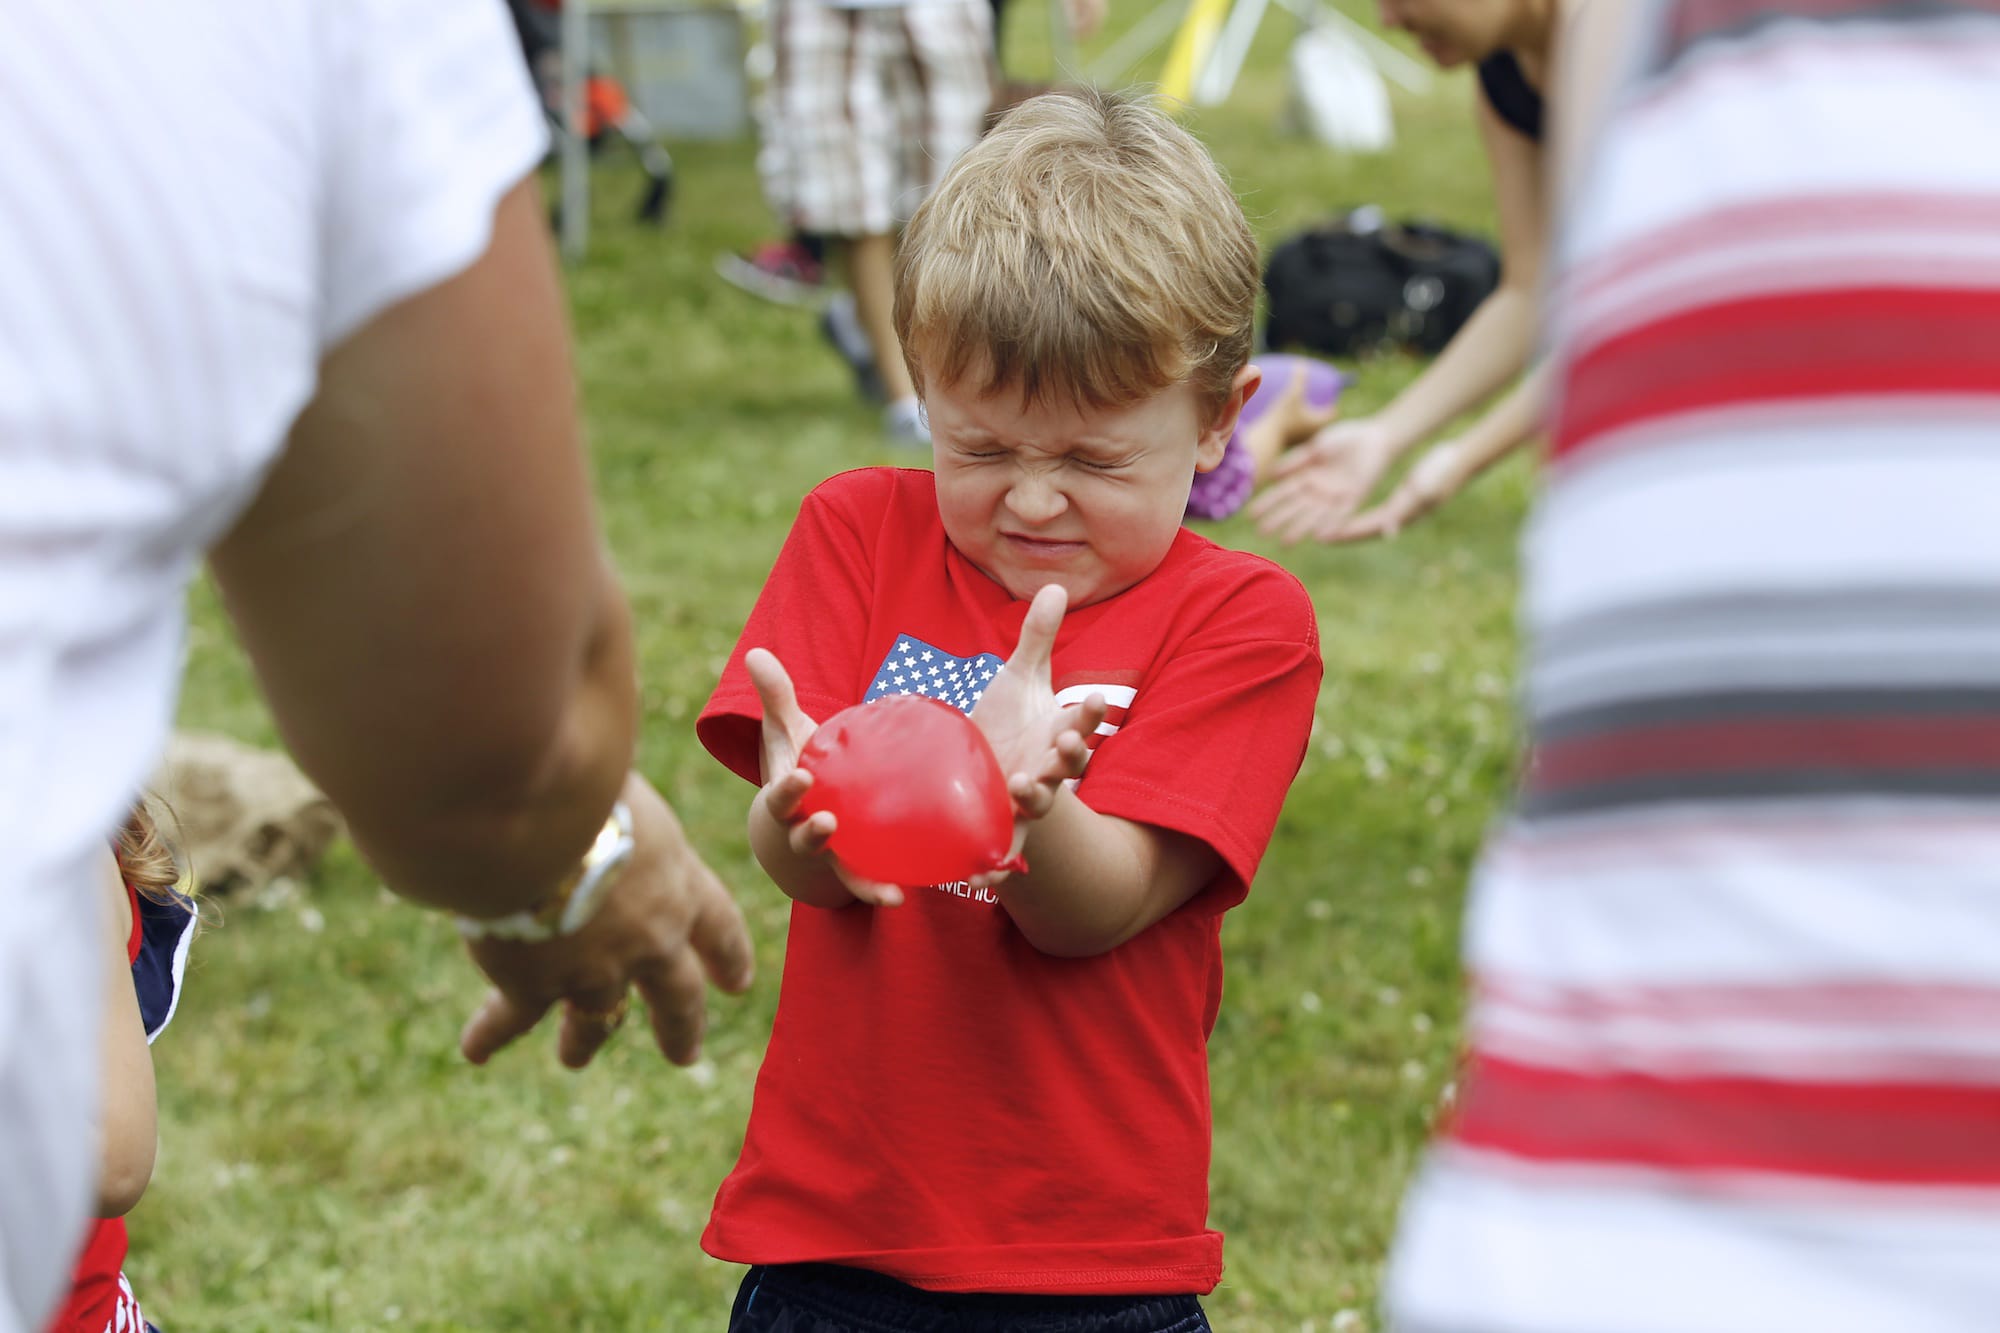 Mason Weyland, 4 of Vancouver participates in the water balloon toss at the 4th of July celebration at Fort Vancouver.